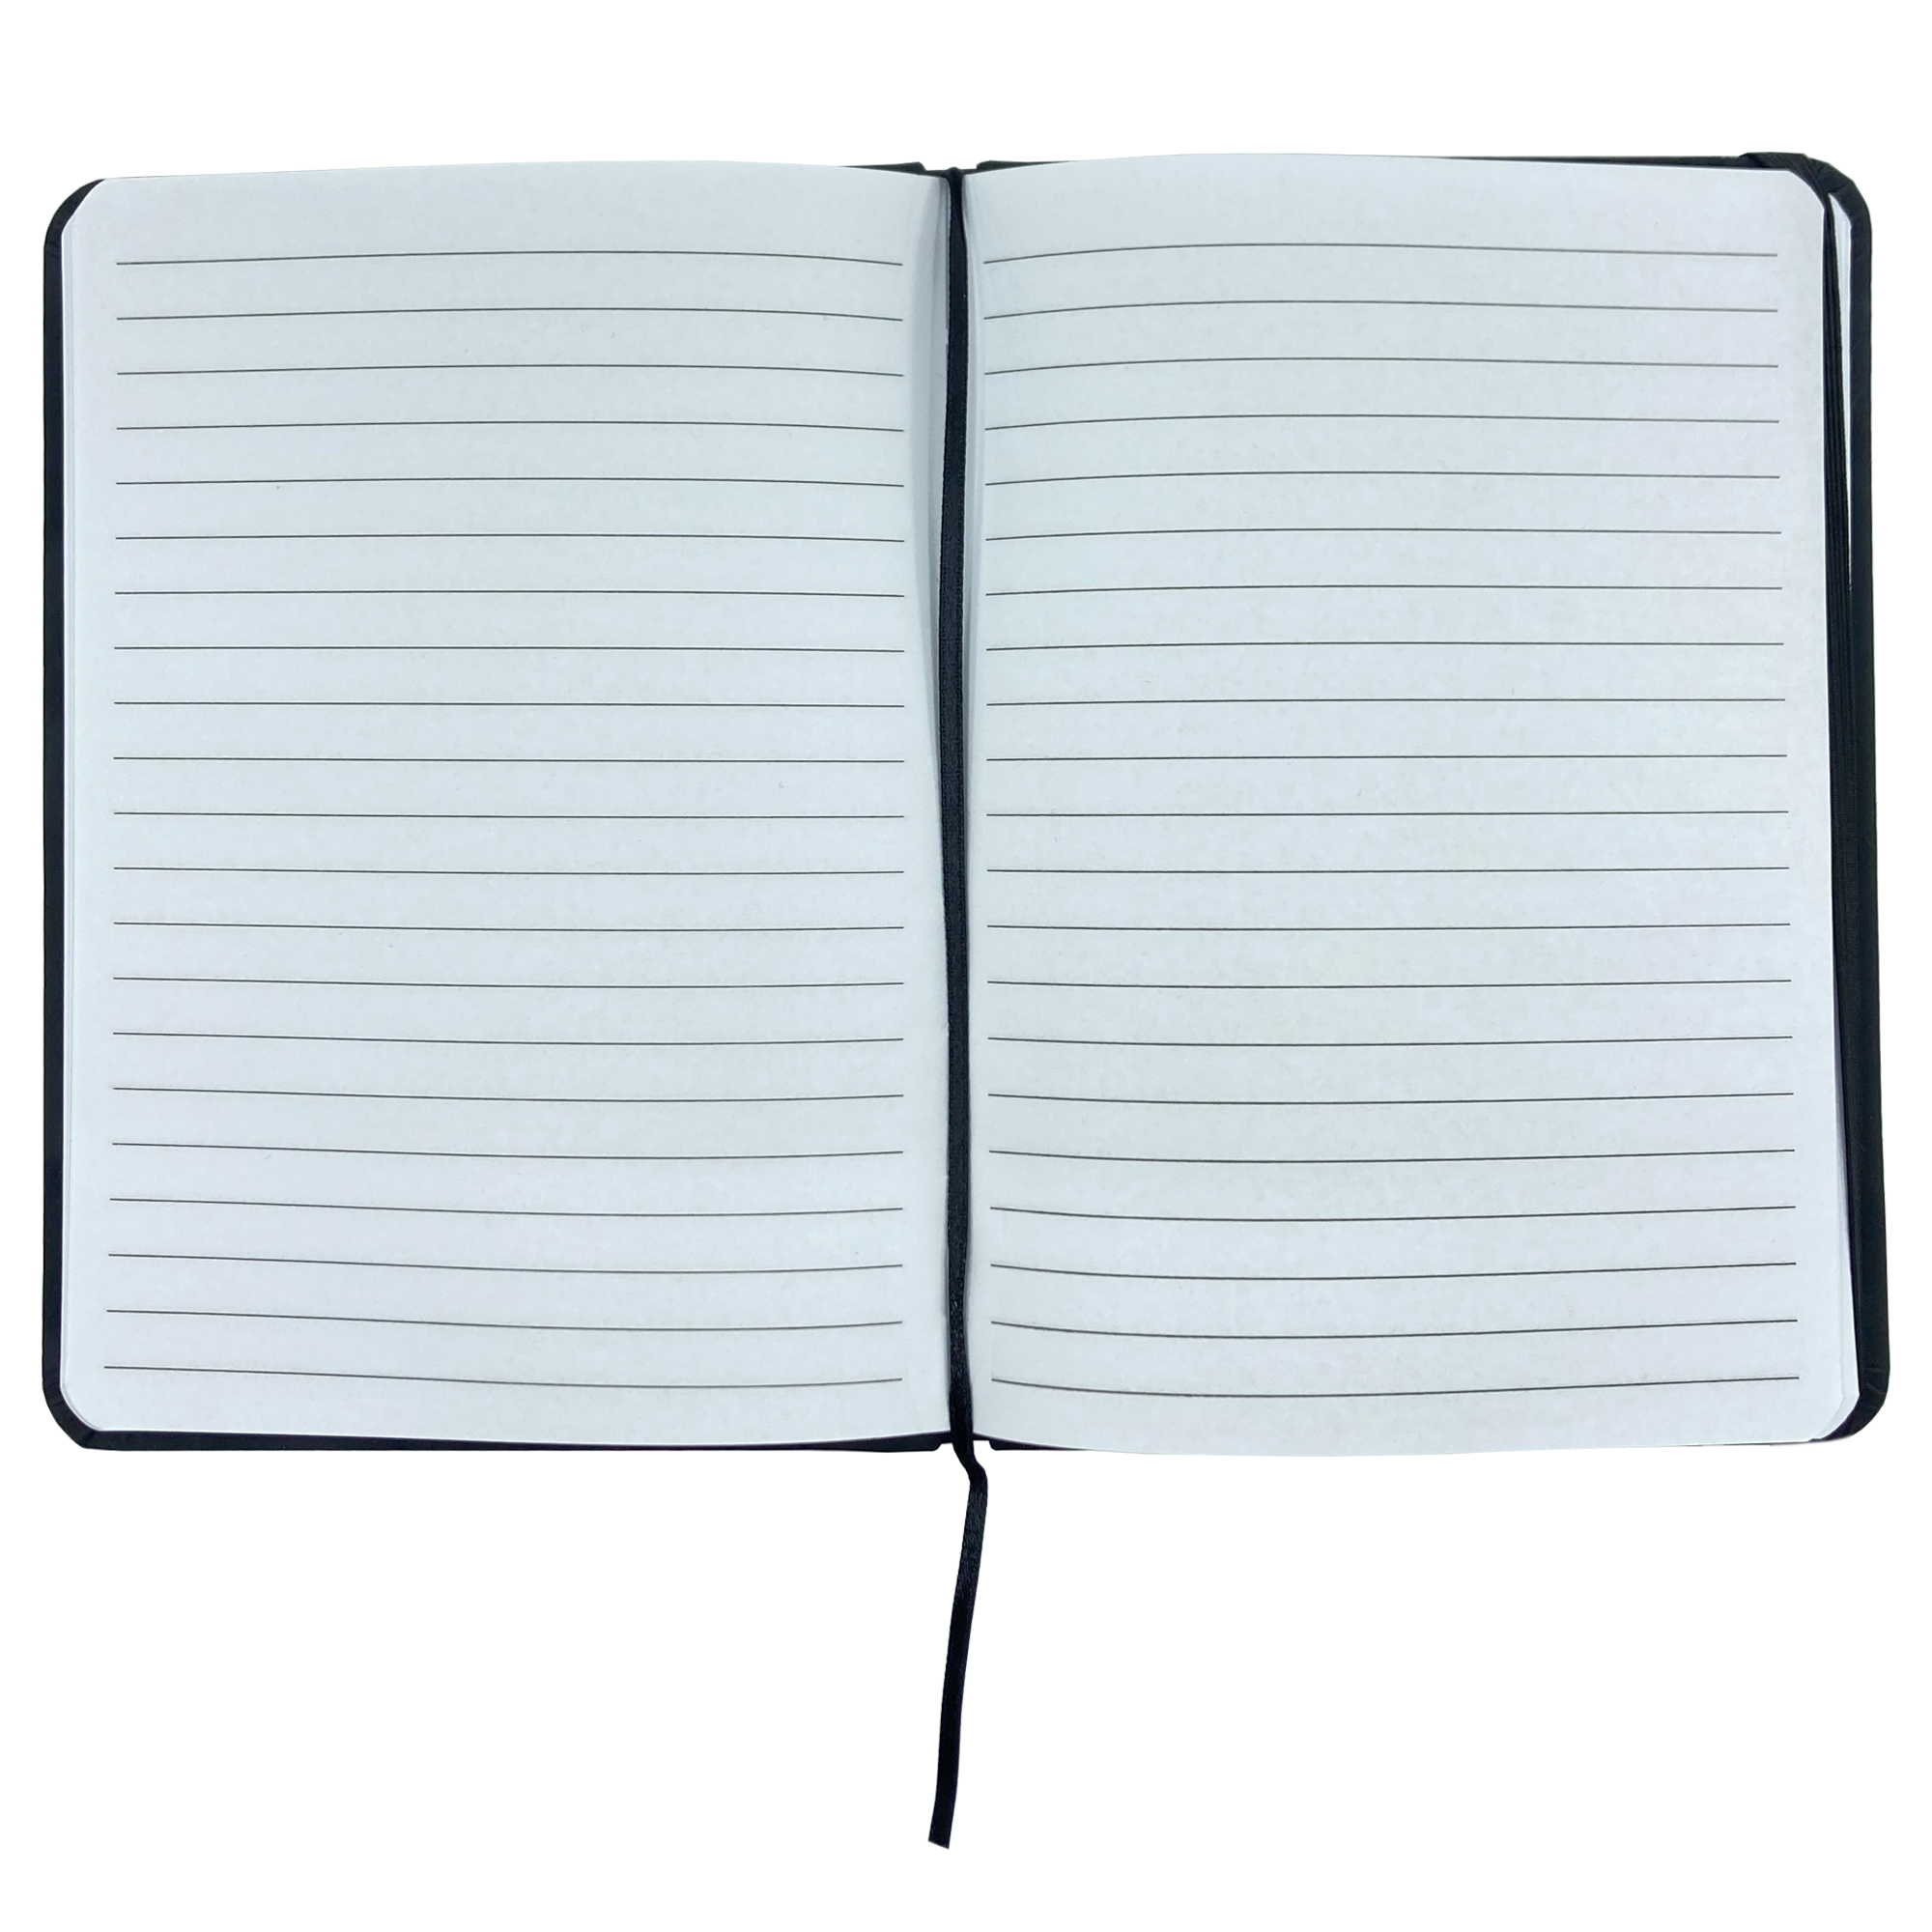  Top view of journal notebook open to show blank lined pages.